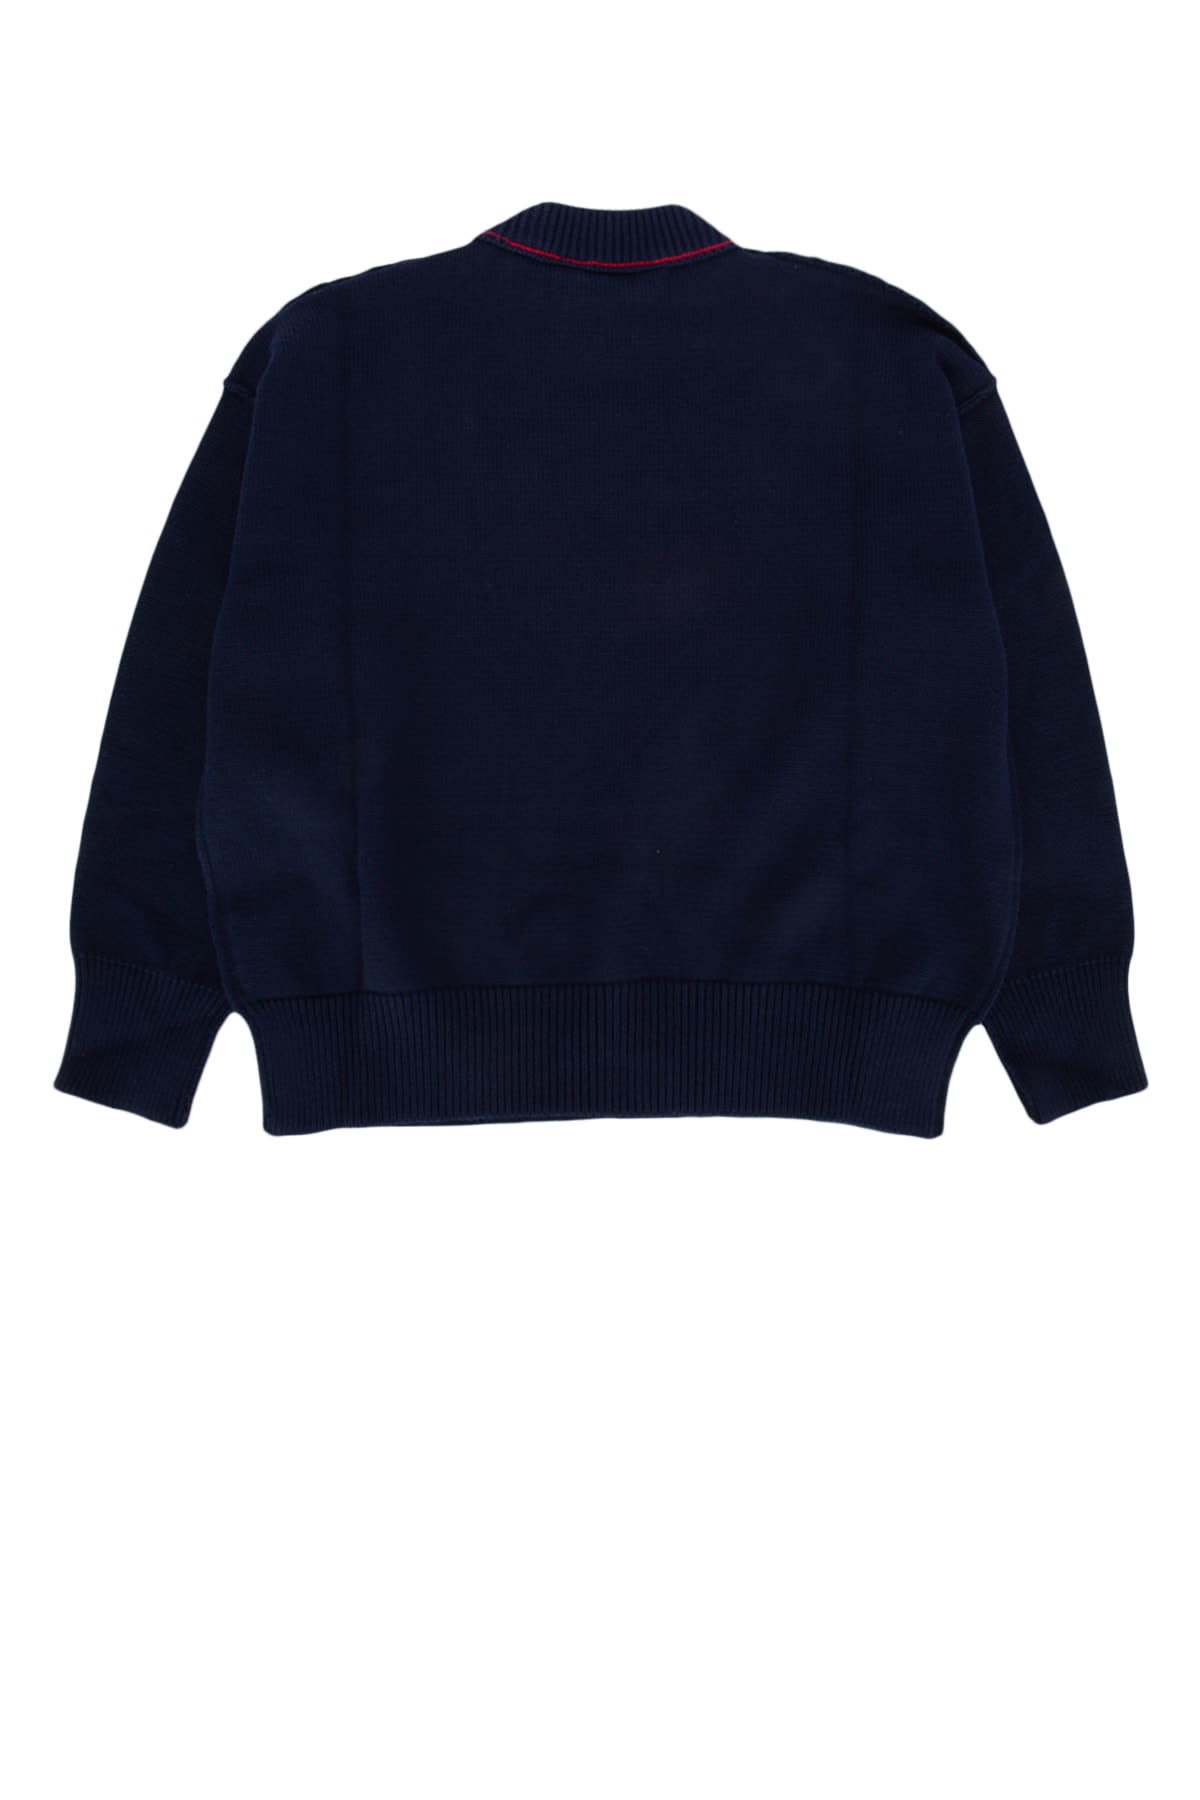 Palm Angels Kids' Maglieria In Navybluered